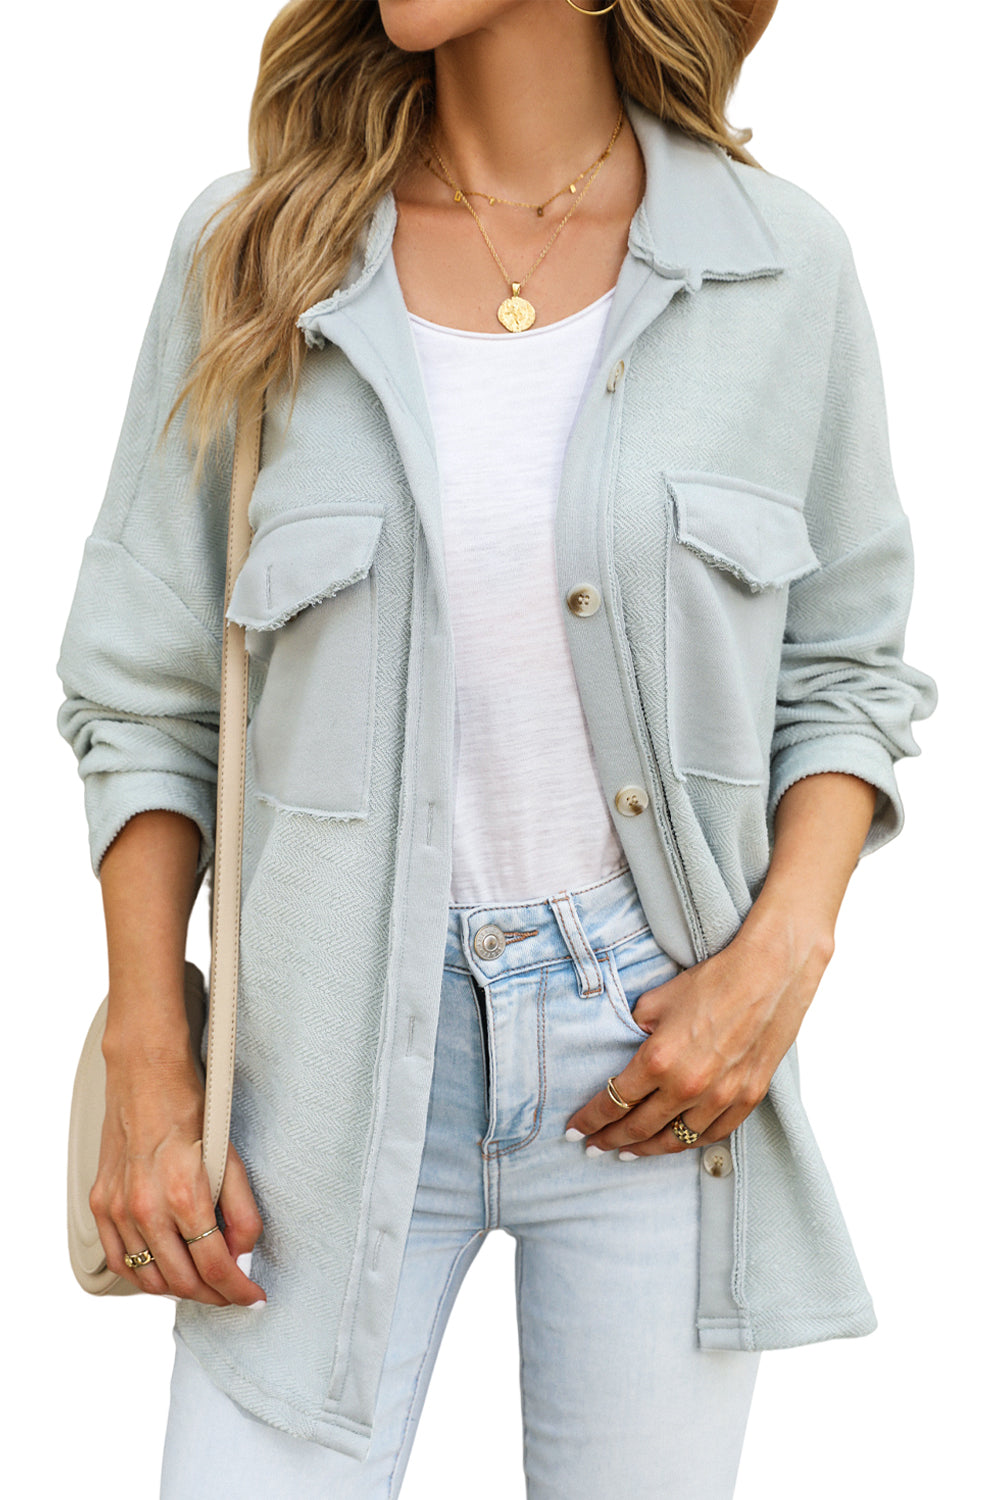 Women's Grey Solid Color Textured Button Up Shirt Jacket with Pockets